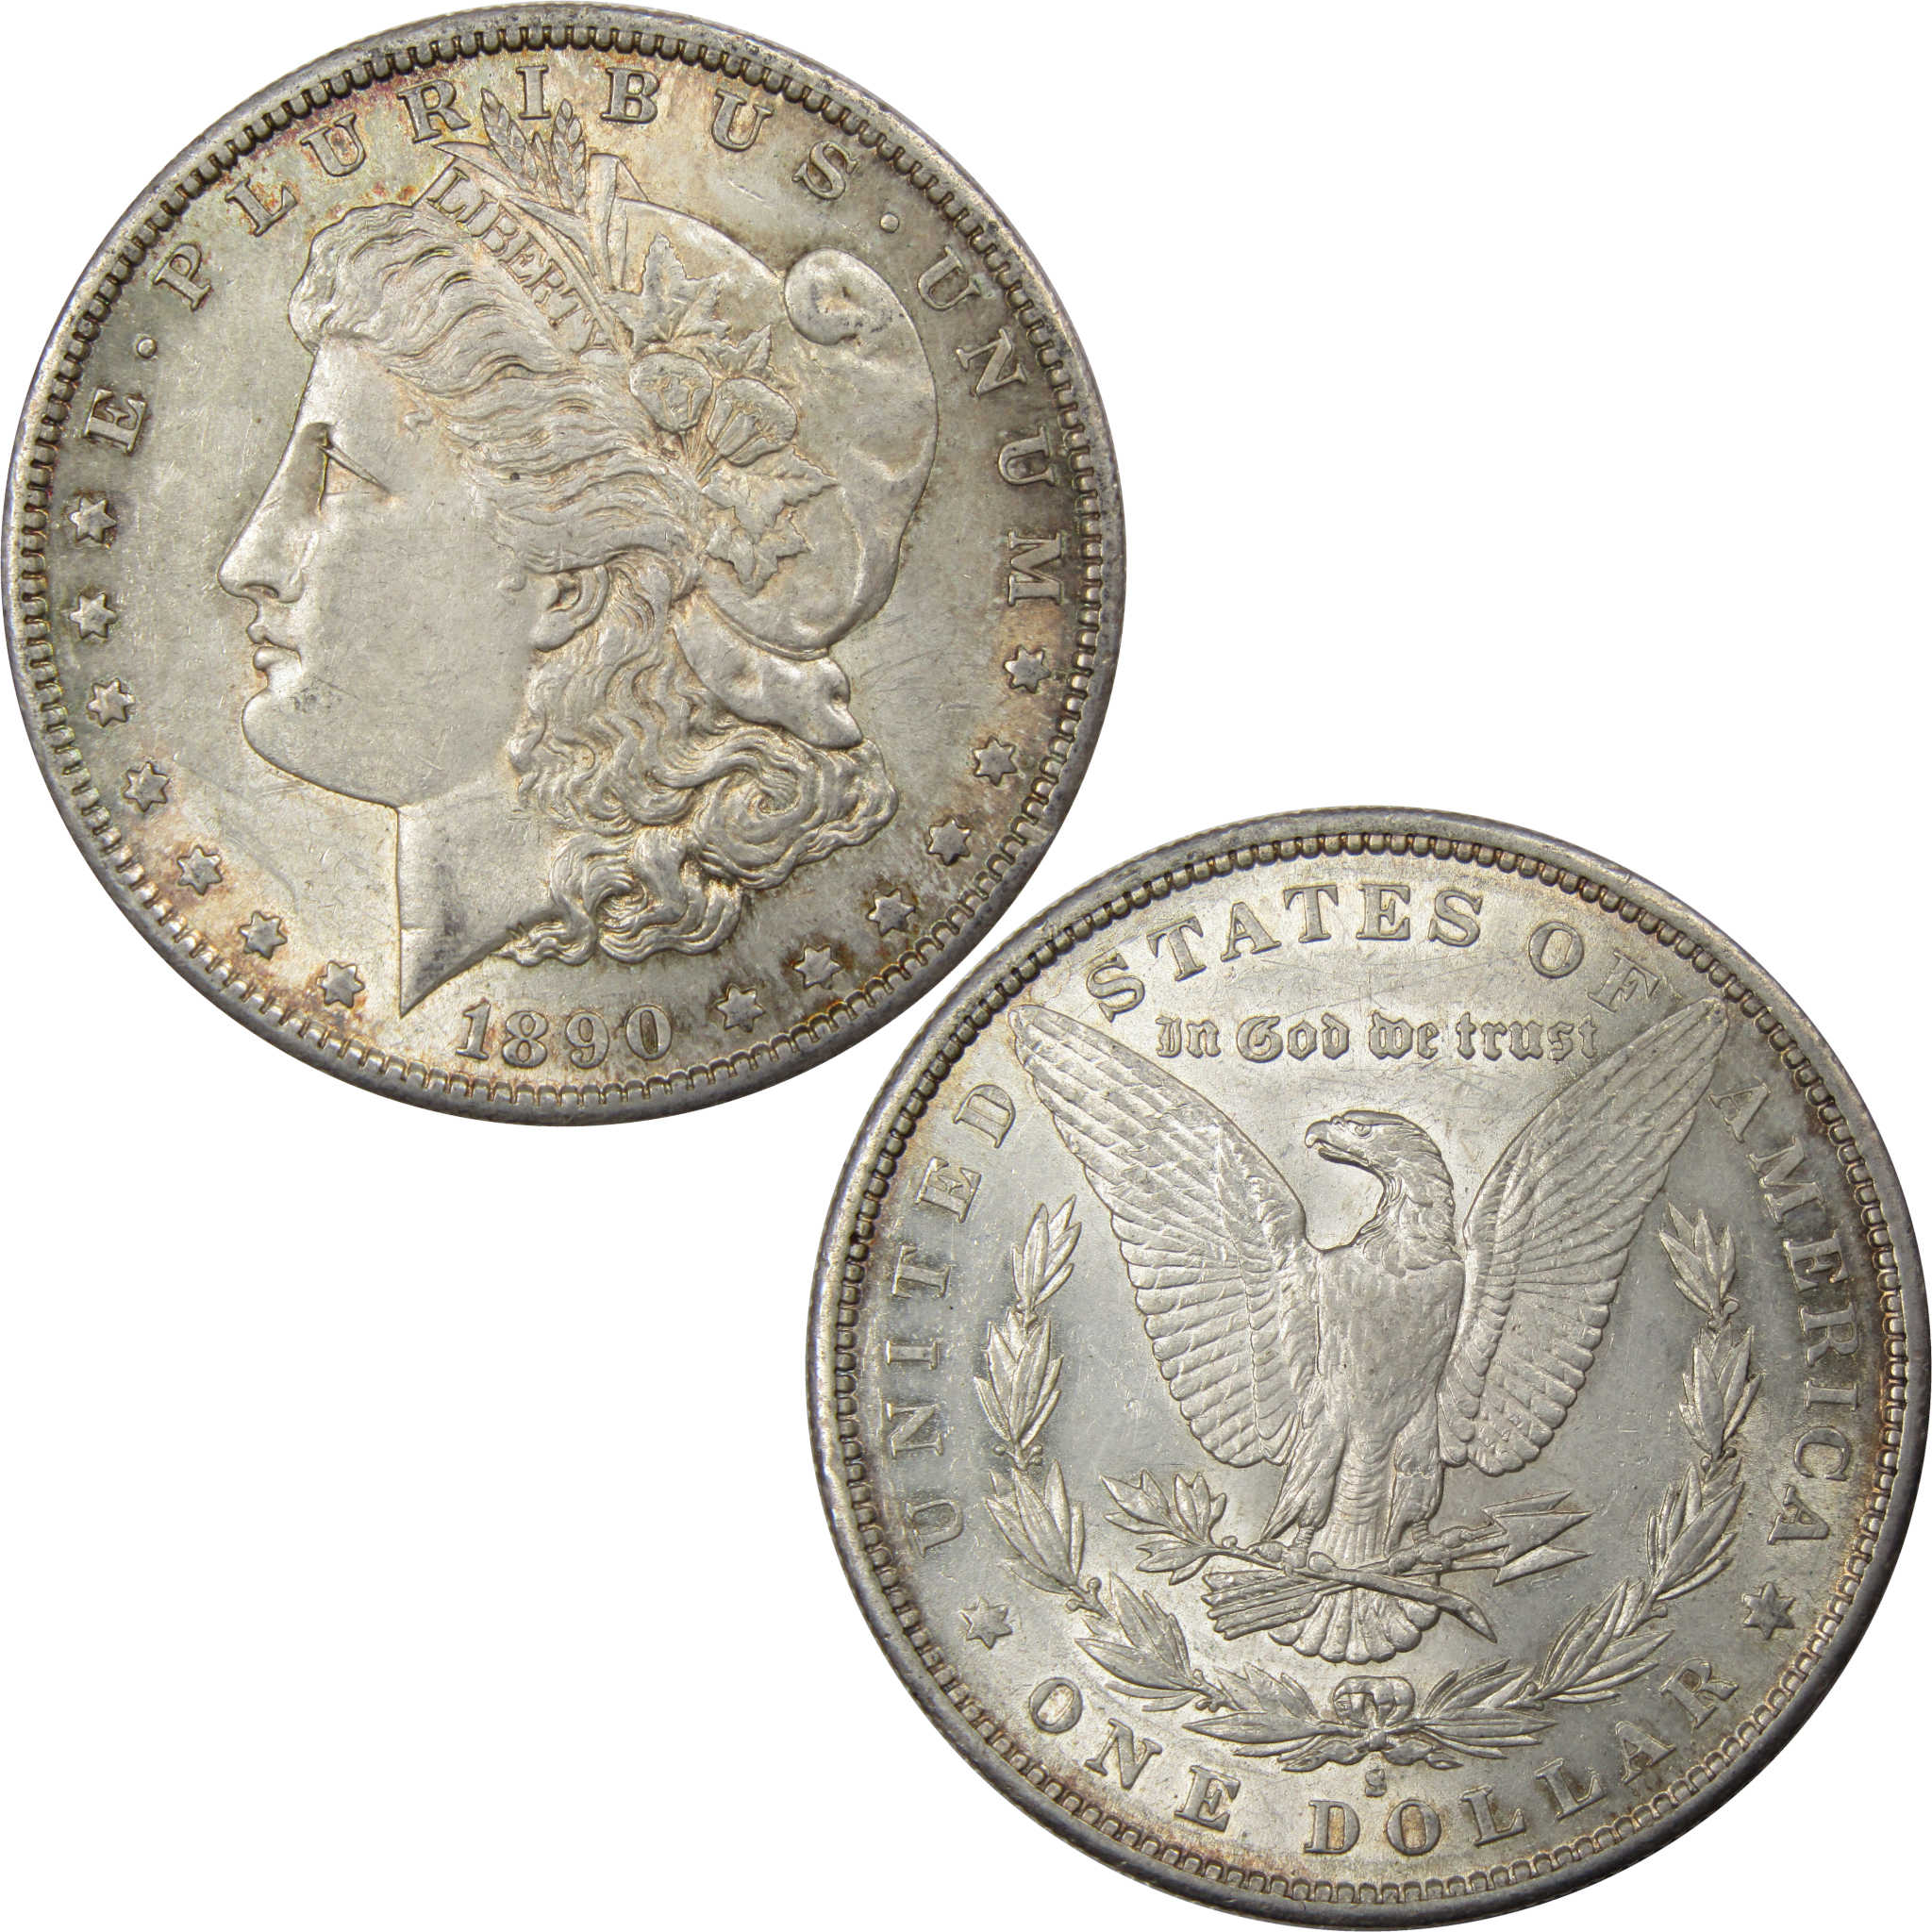 1890 S Morgan Dollar AU About Uncirculated 90% Silver SKU:I1551 - Morgan coin - Morgan silver dollar - Morgan silver dollar for sale - Profile Coins &amp; Collectibles